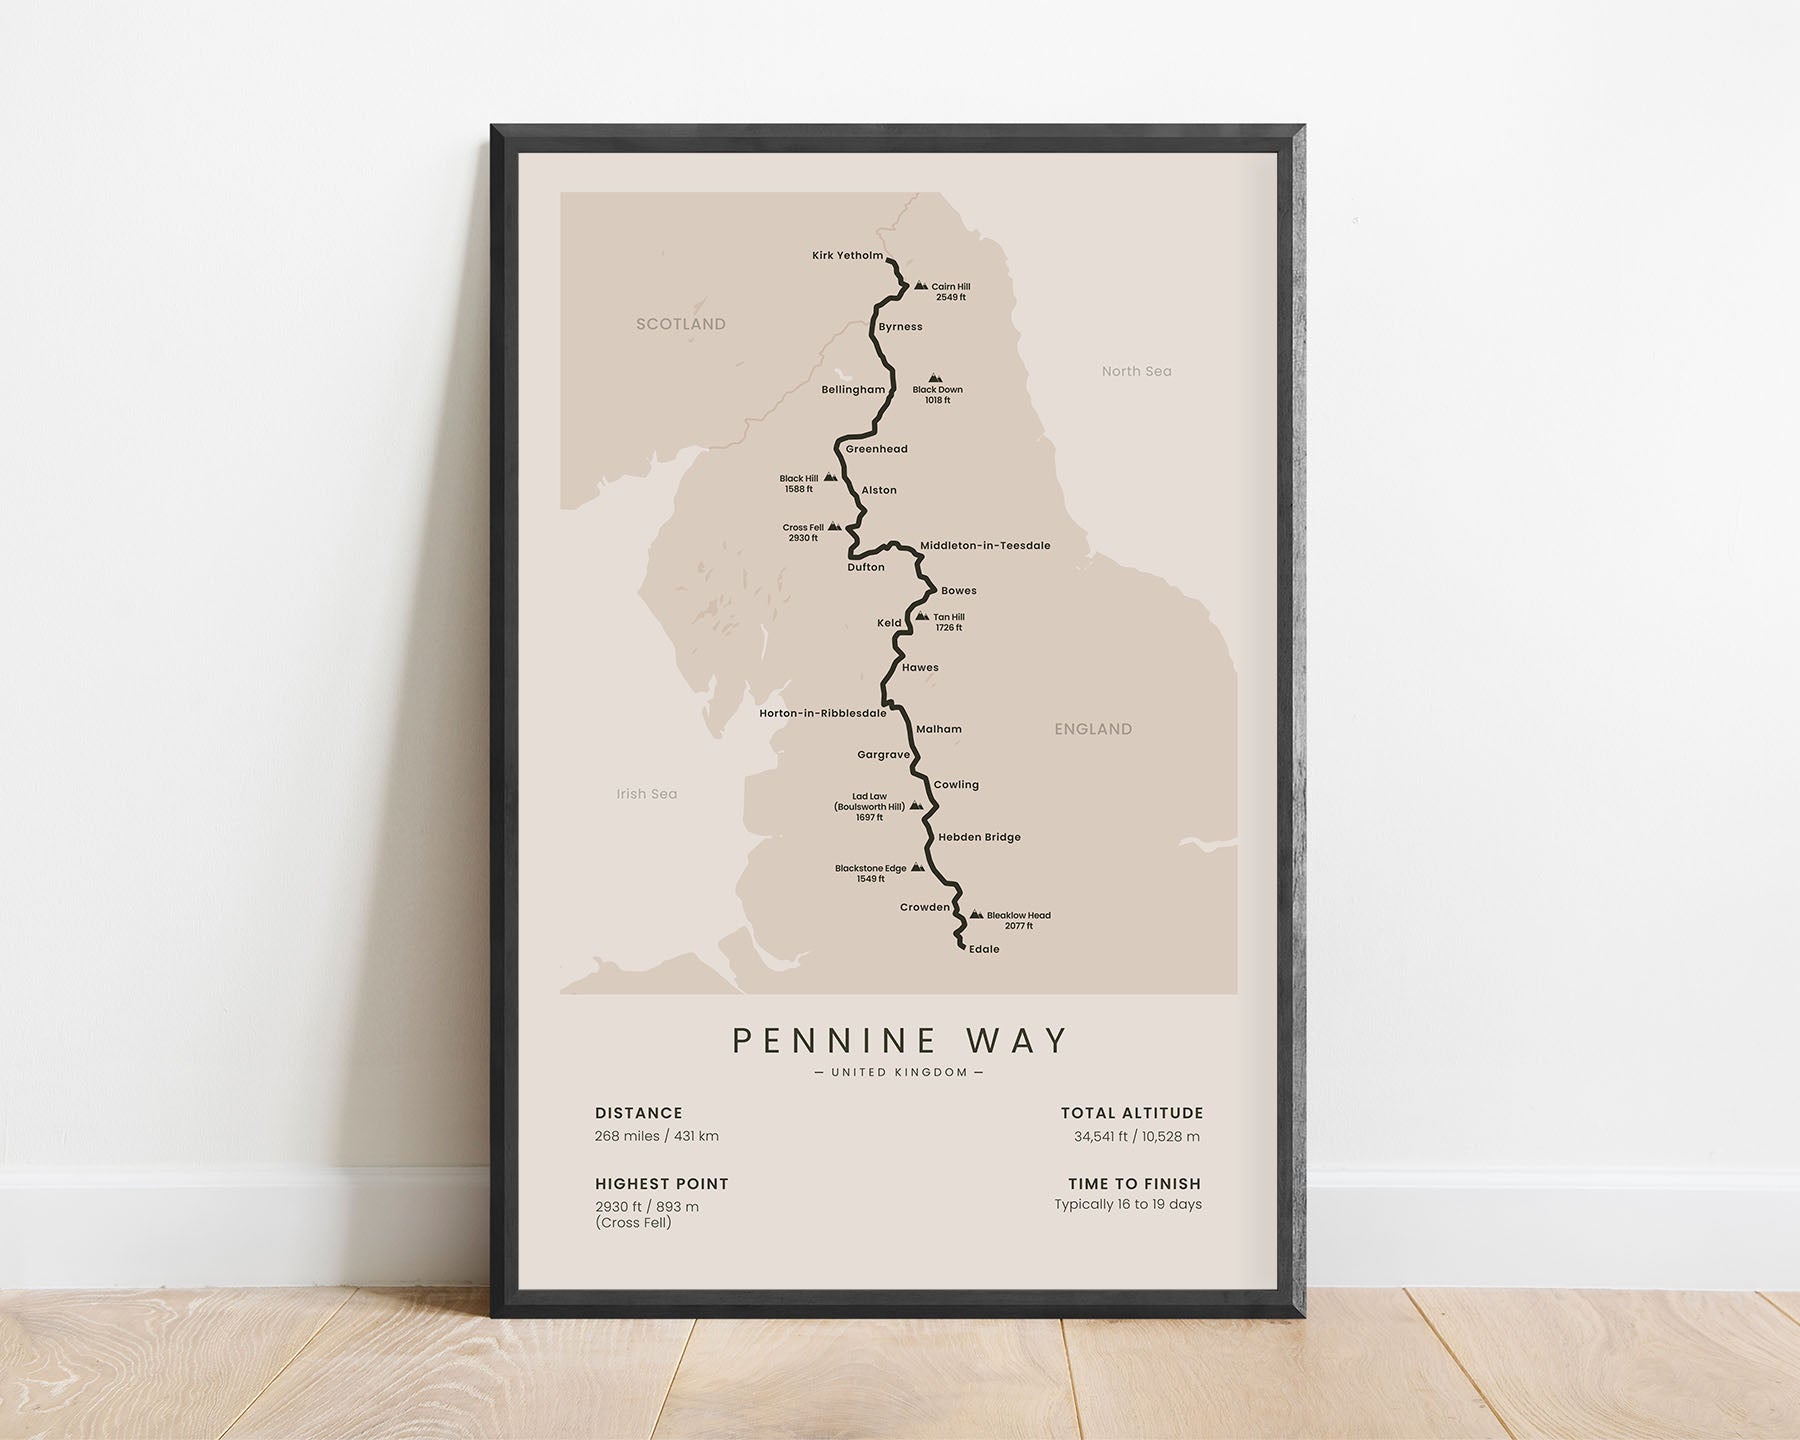 Pennine Way (Edale to Kirk Yetholm, Scotland) trail wall map with beige background